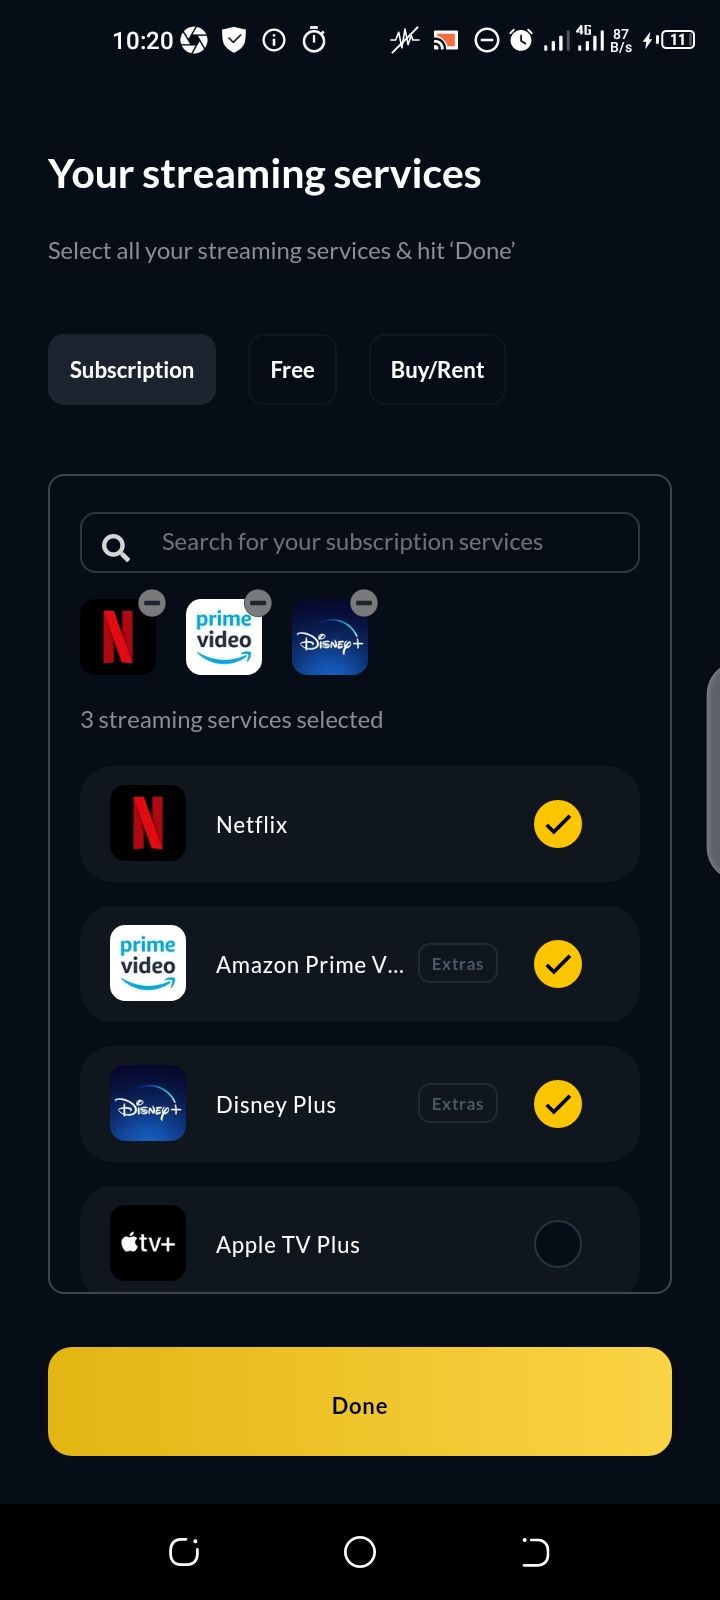 Streaming services available on the JustWatch app 